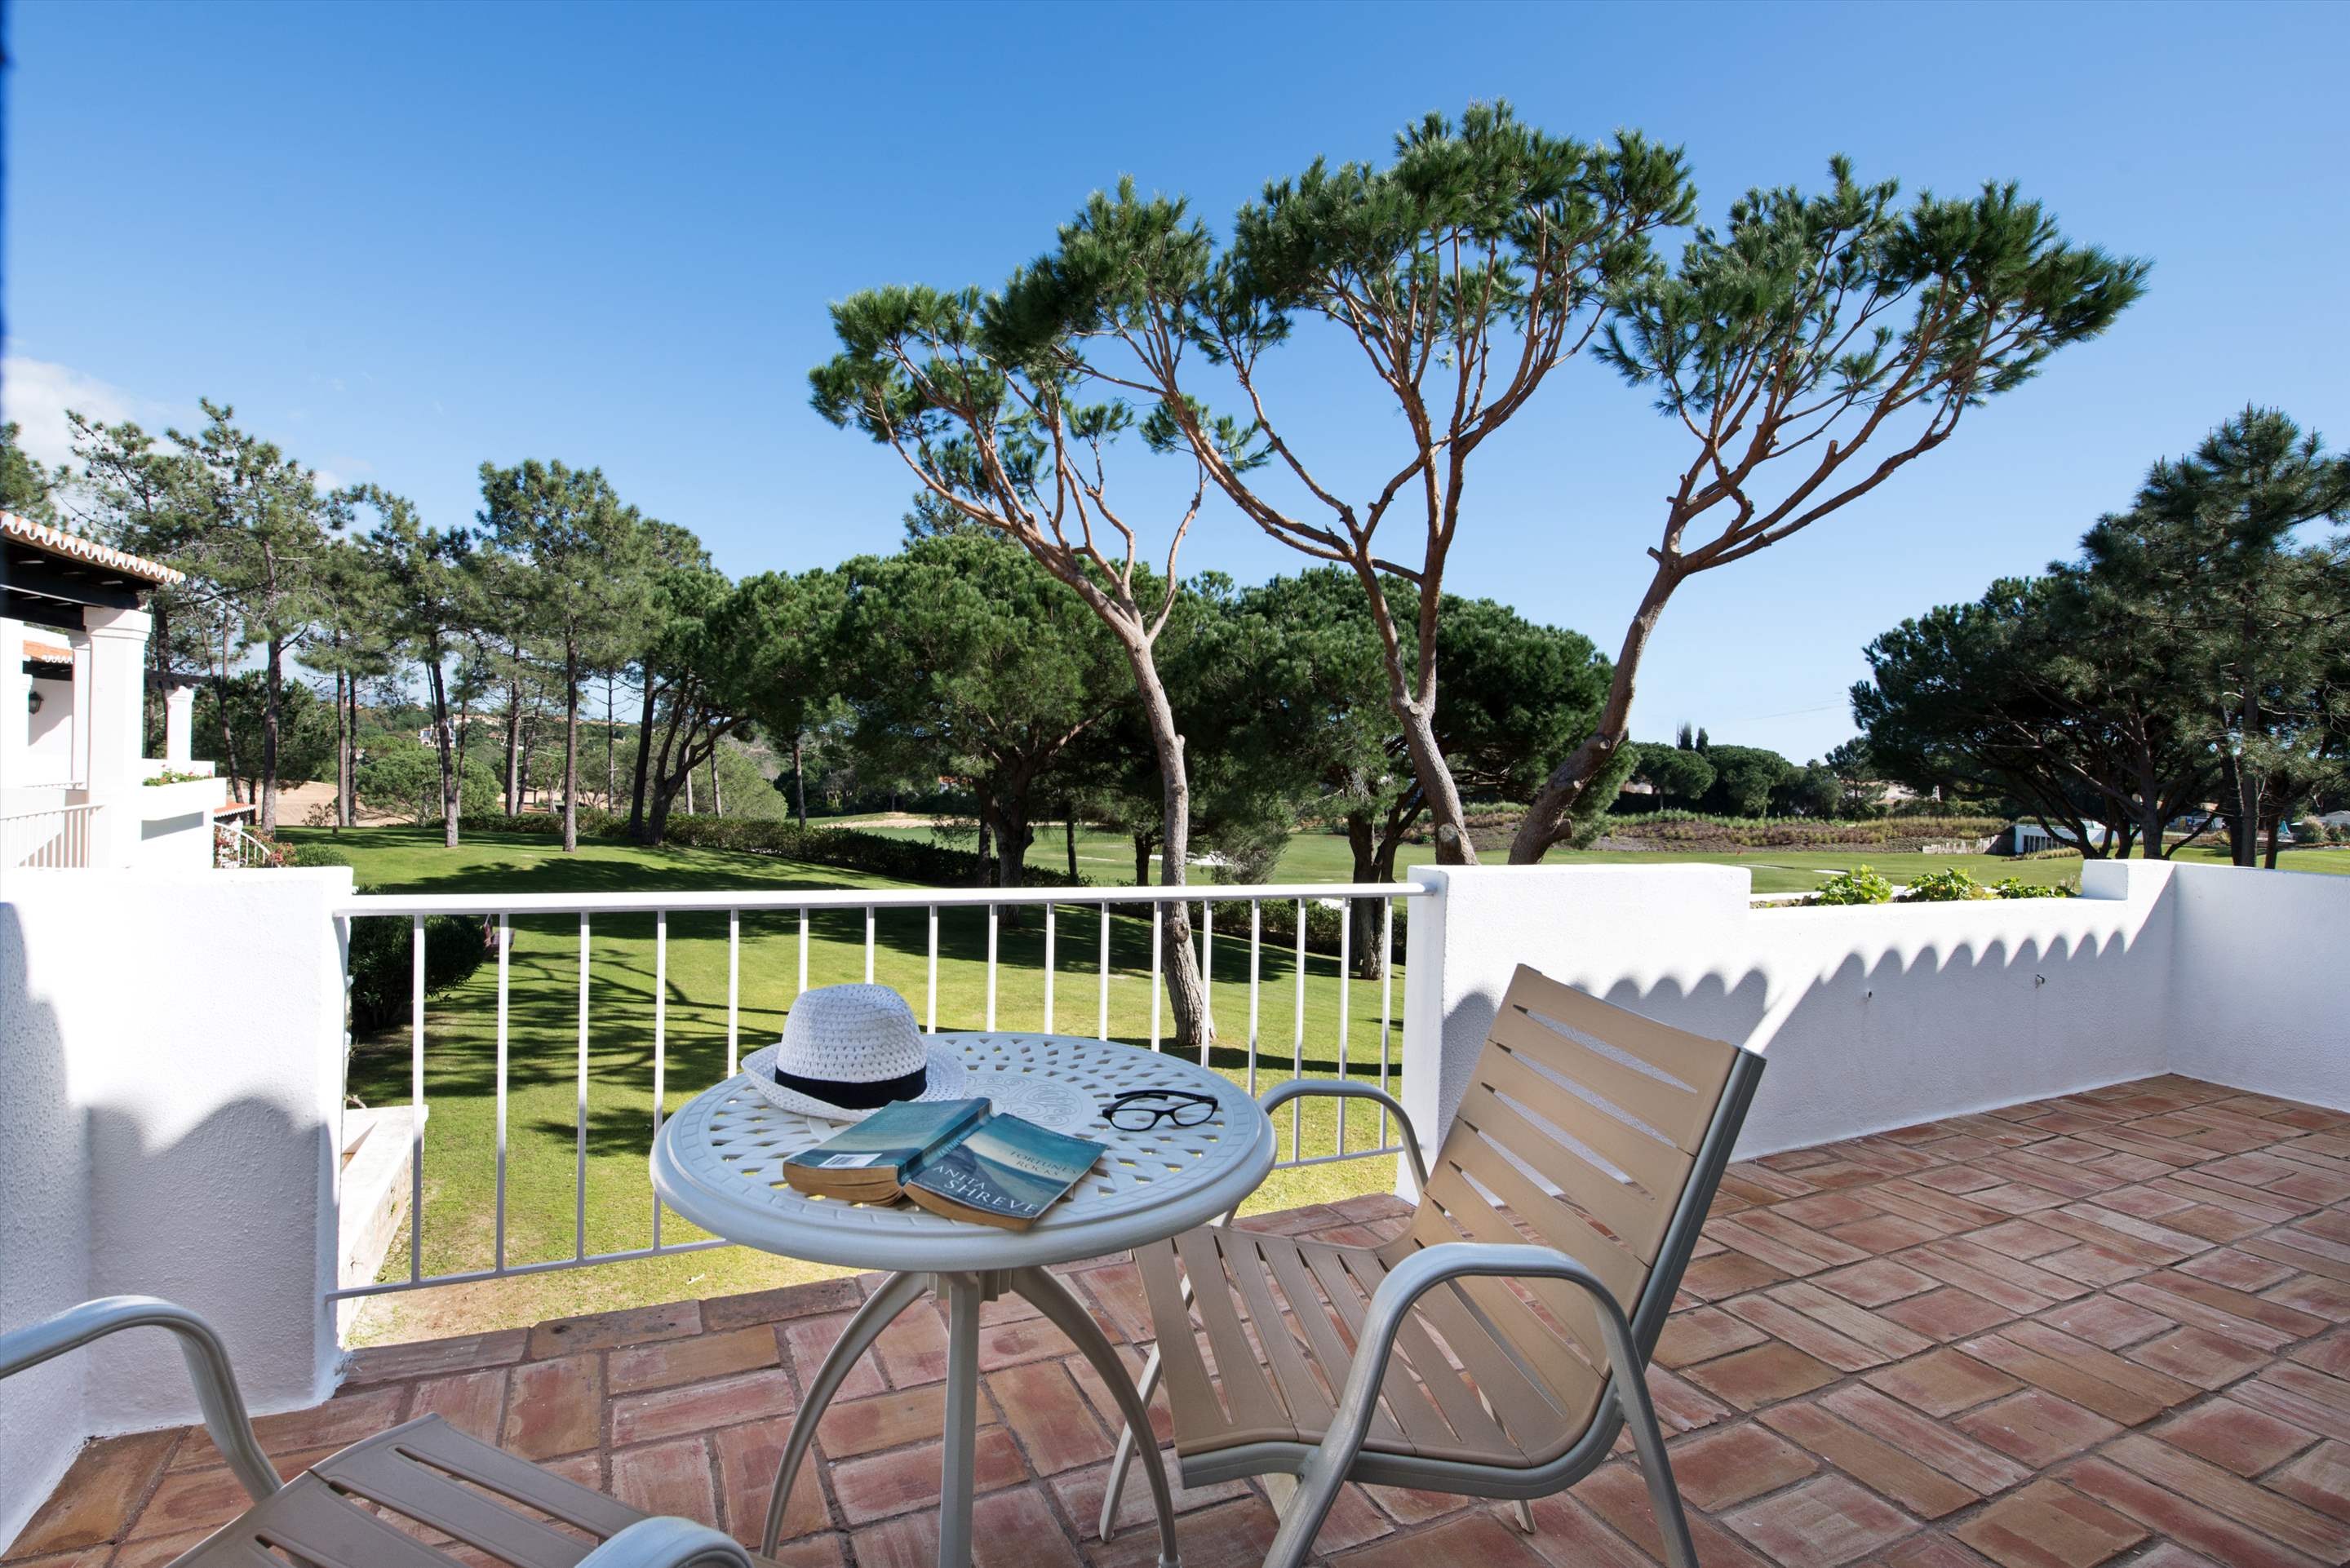 Four Seasons Country Club 2 bed, Sunday Arrival, 2 bedroom apartment in Four Seasons Country Club, Algarve Photo #9